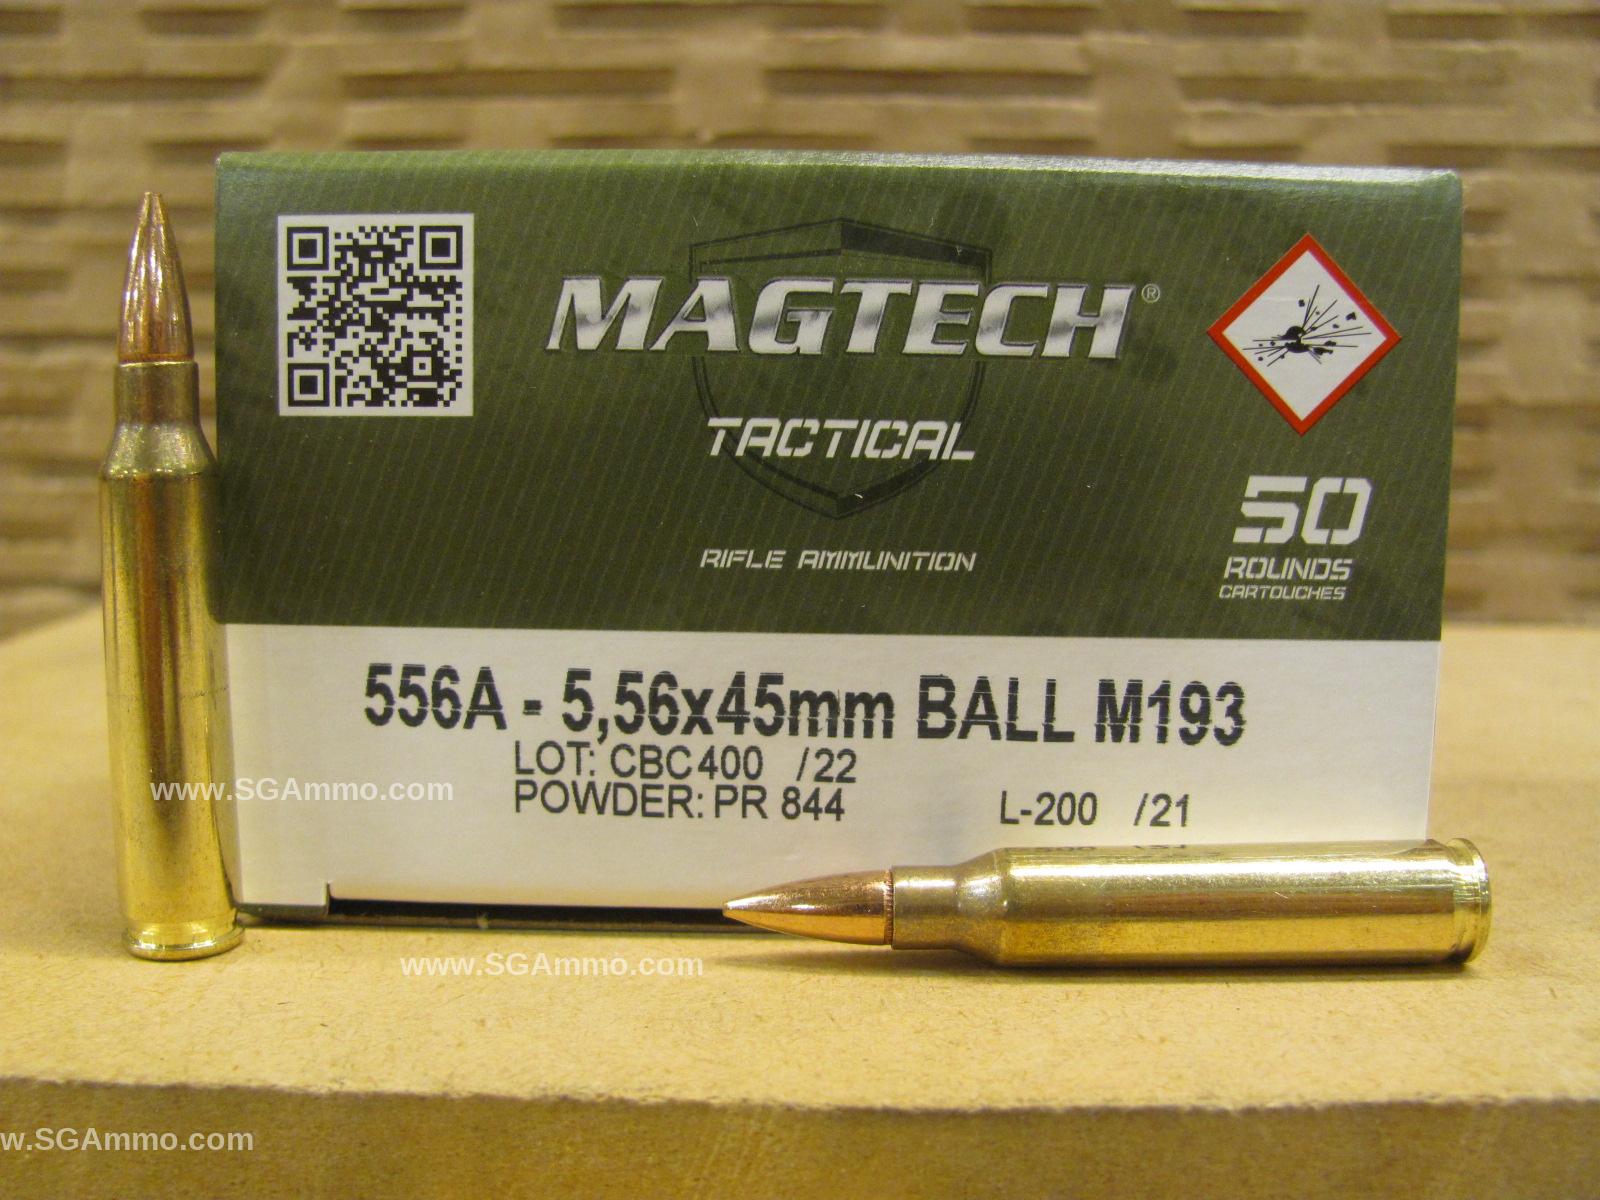 1000 Round Case - 5.56mm 55 Grain FMJ M193 Ball Ammo by Magtech - 556A